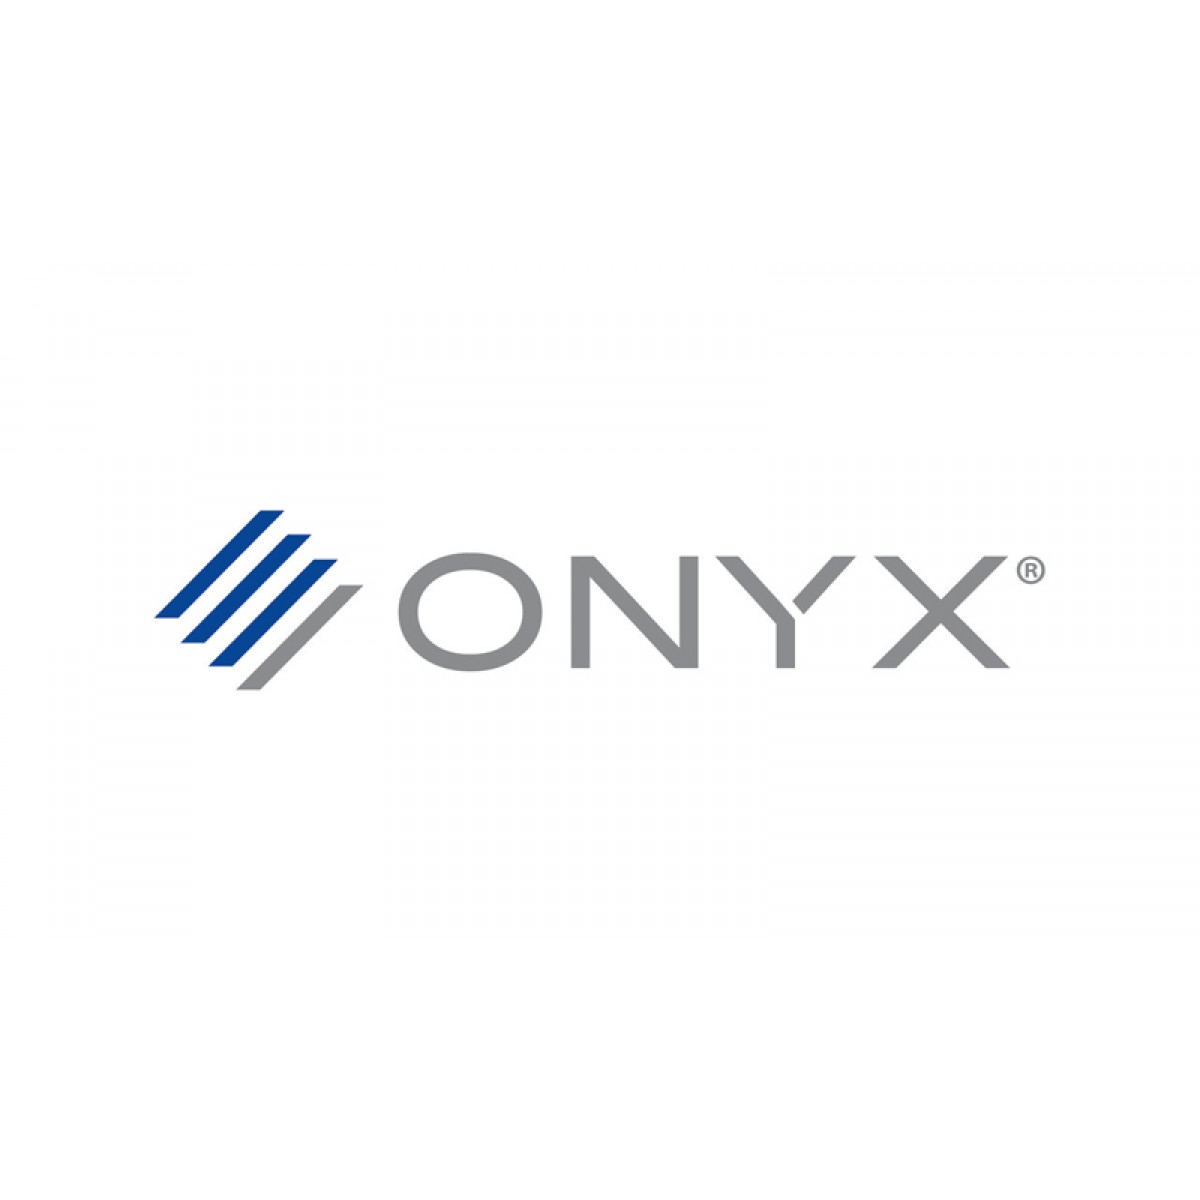 Onyx rip software for mac